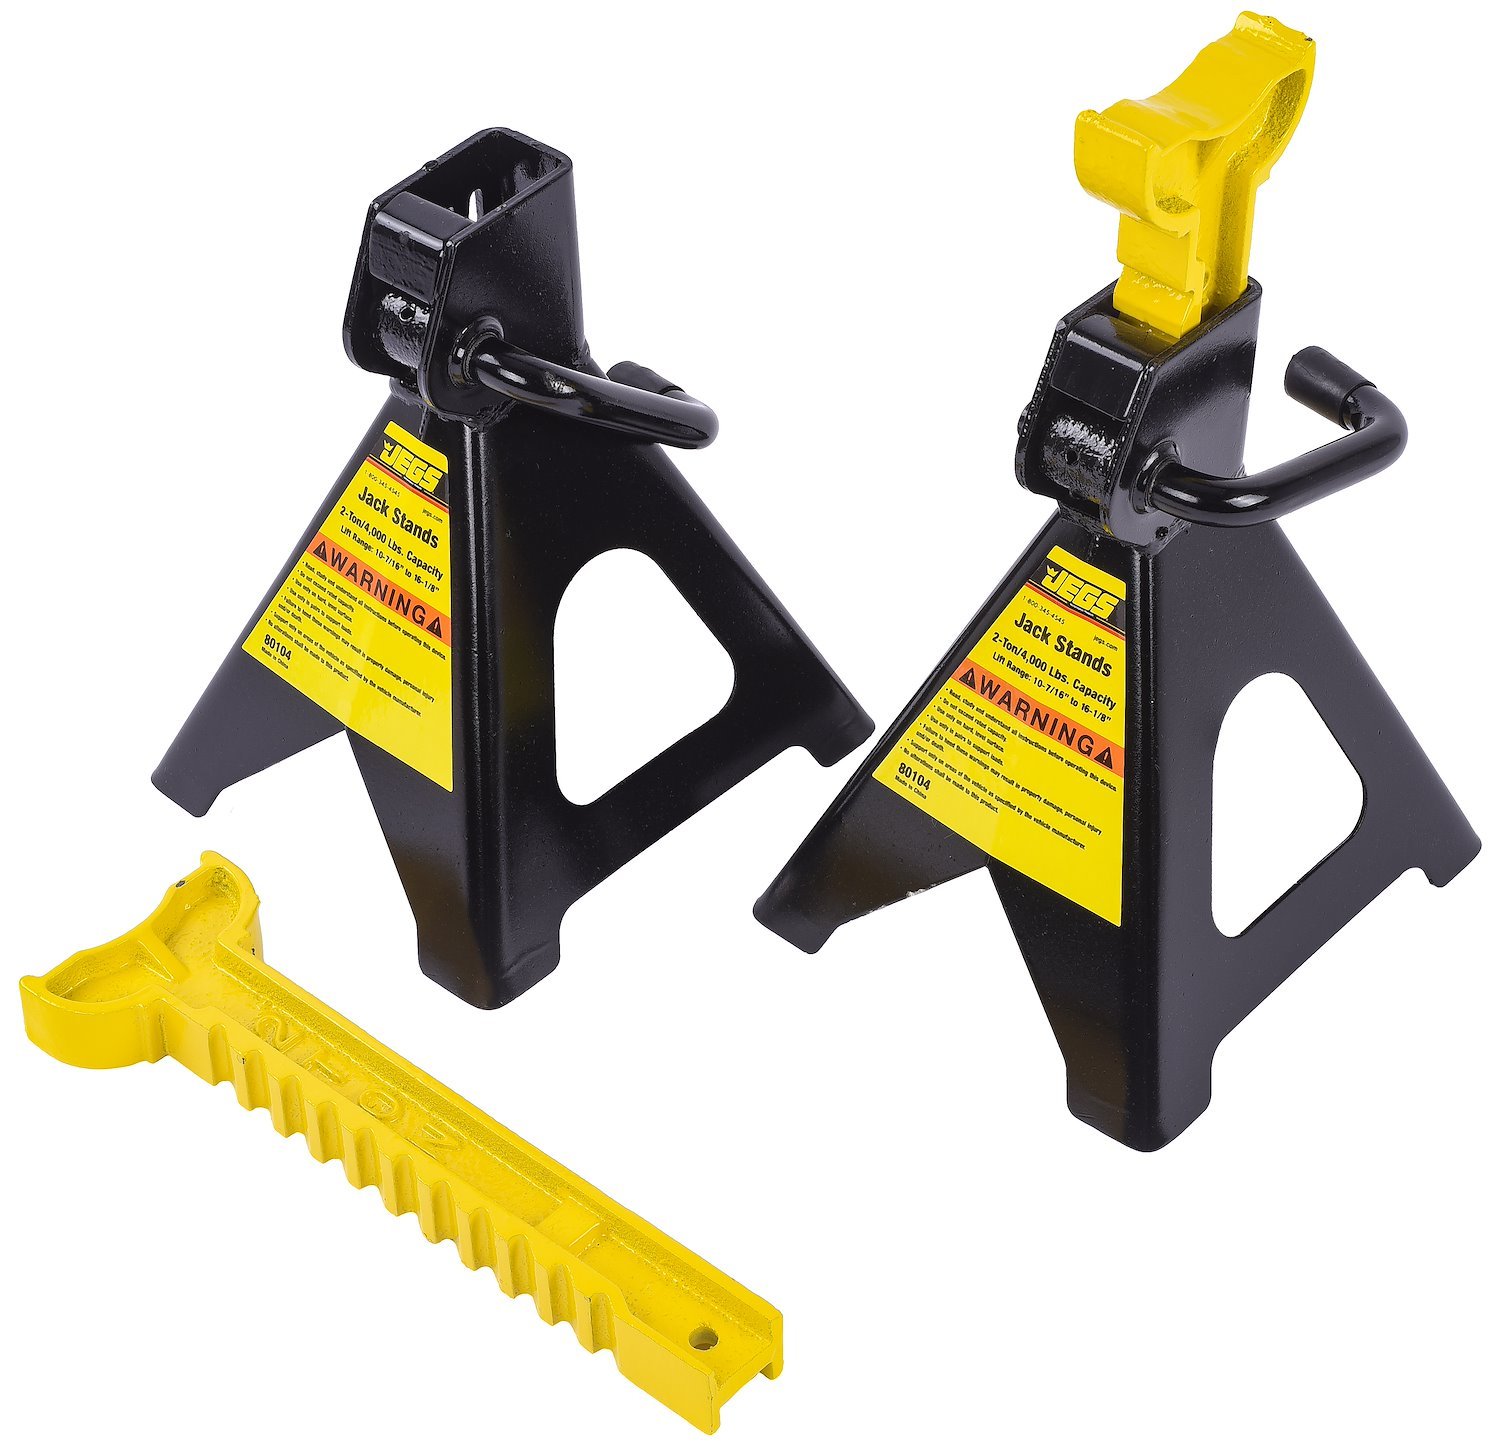 Jack Stands [2-Ton Capacity]